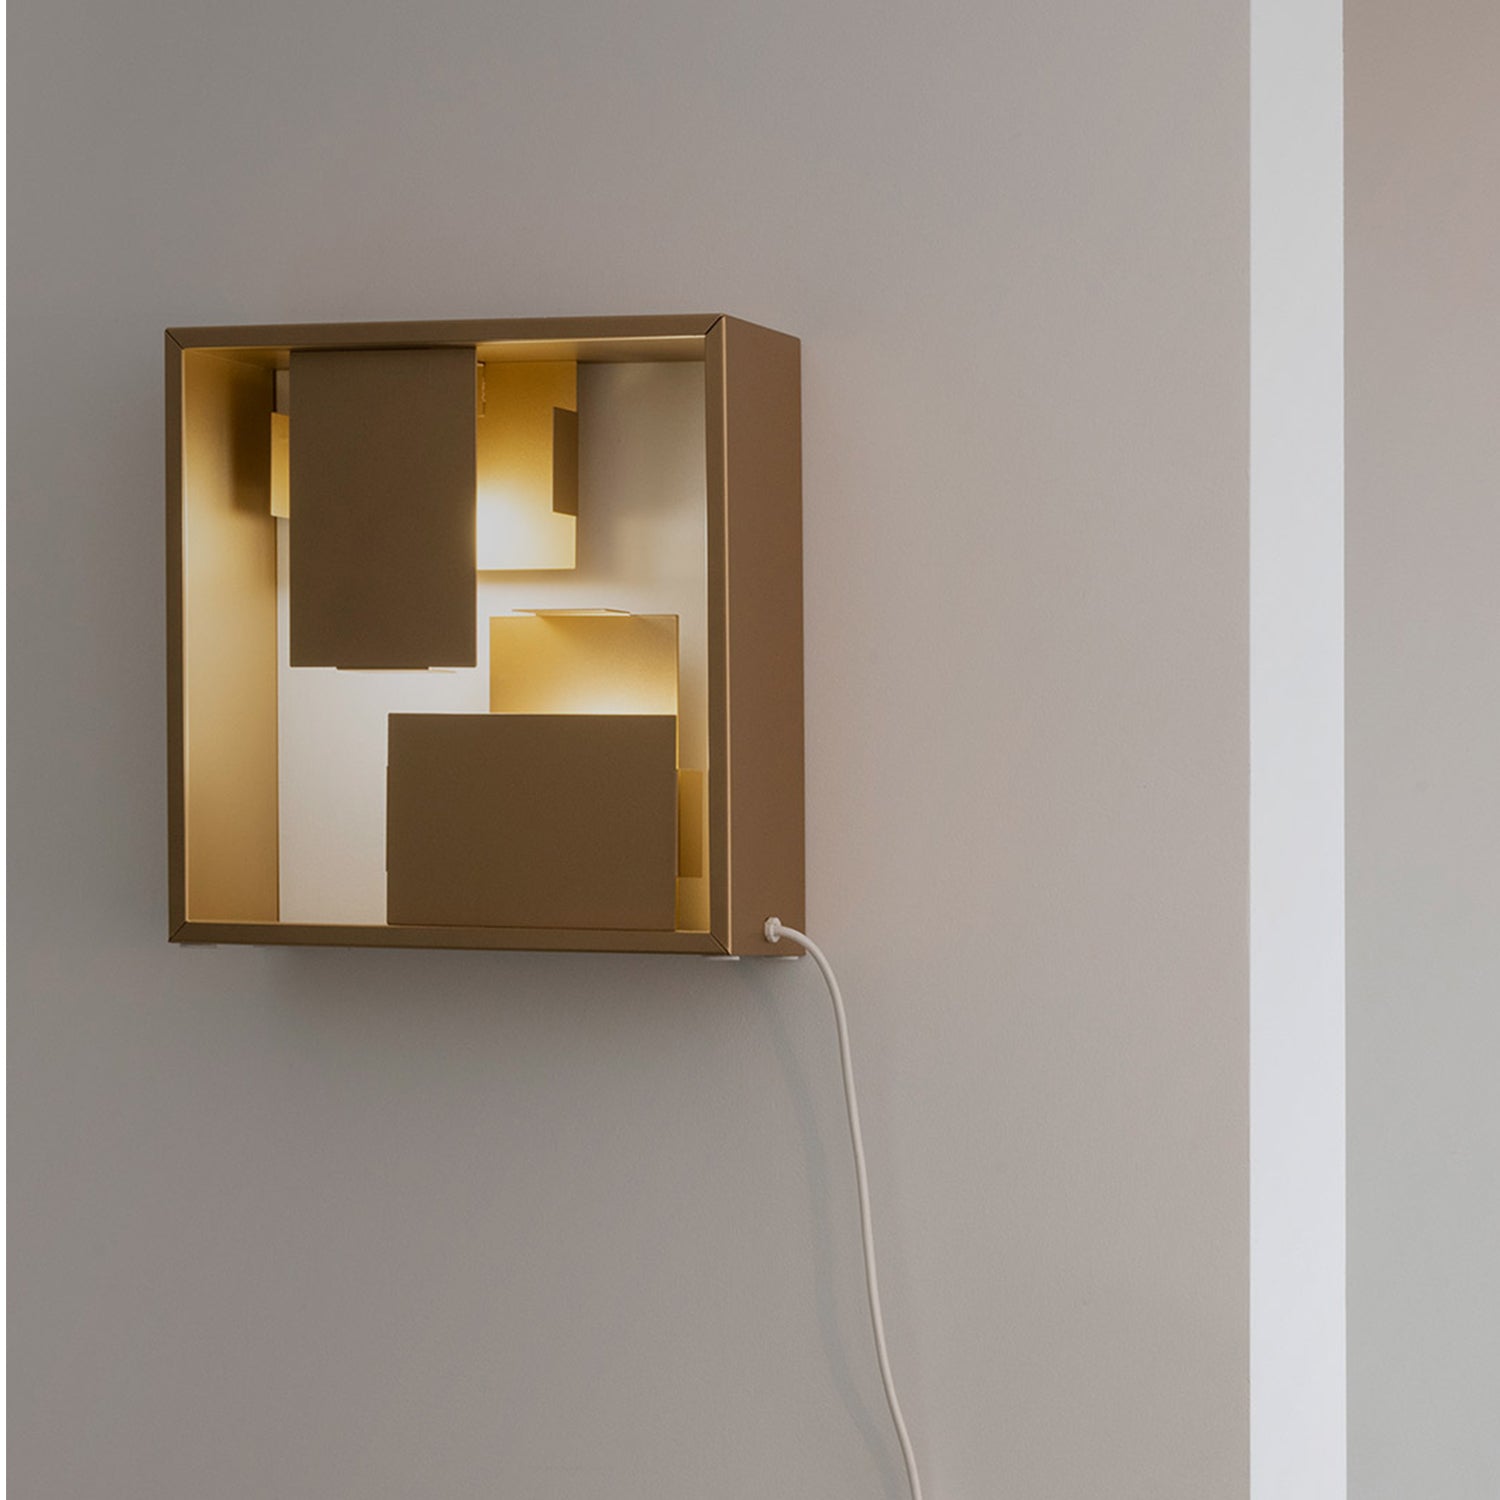 Artemide Fato Table Lamp in gold mounted on a wall